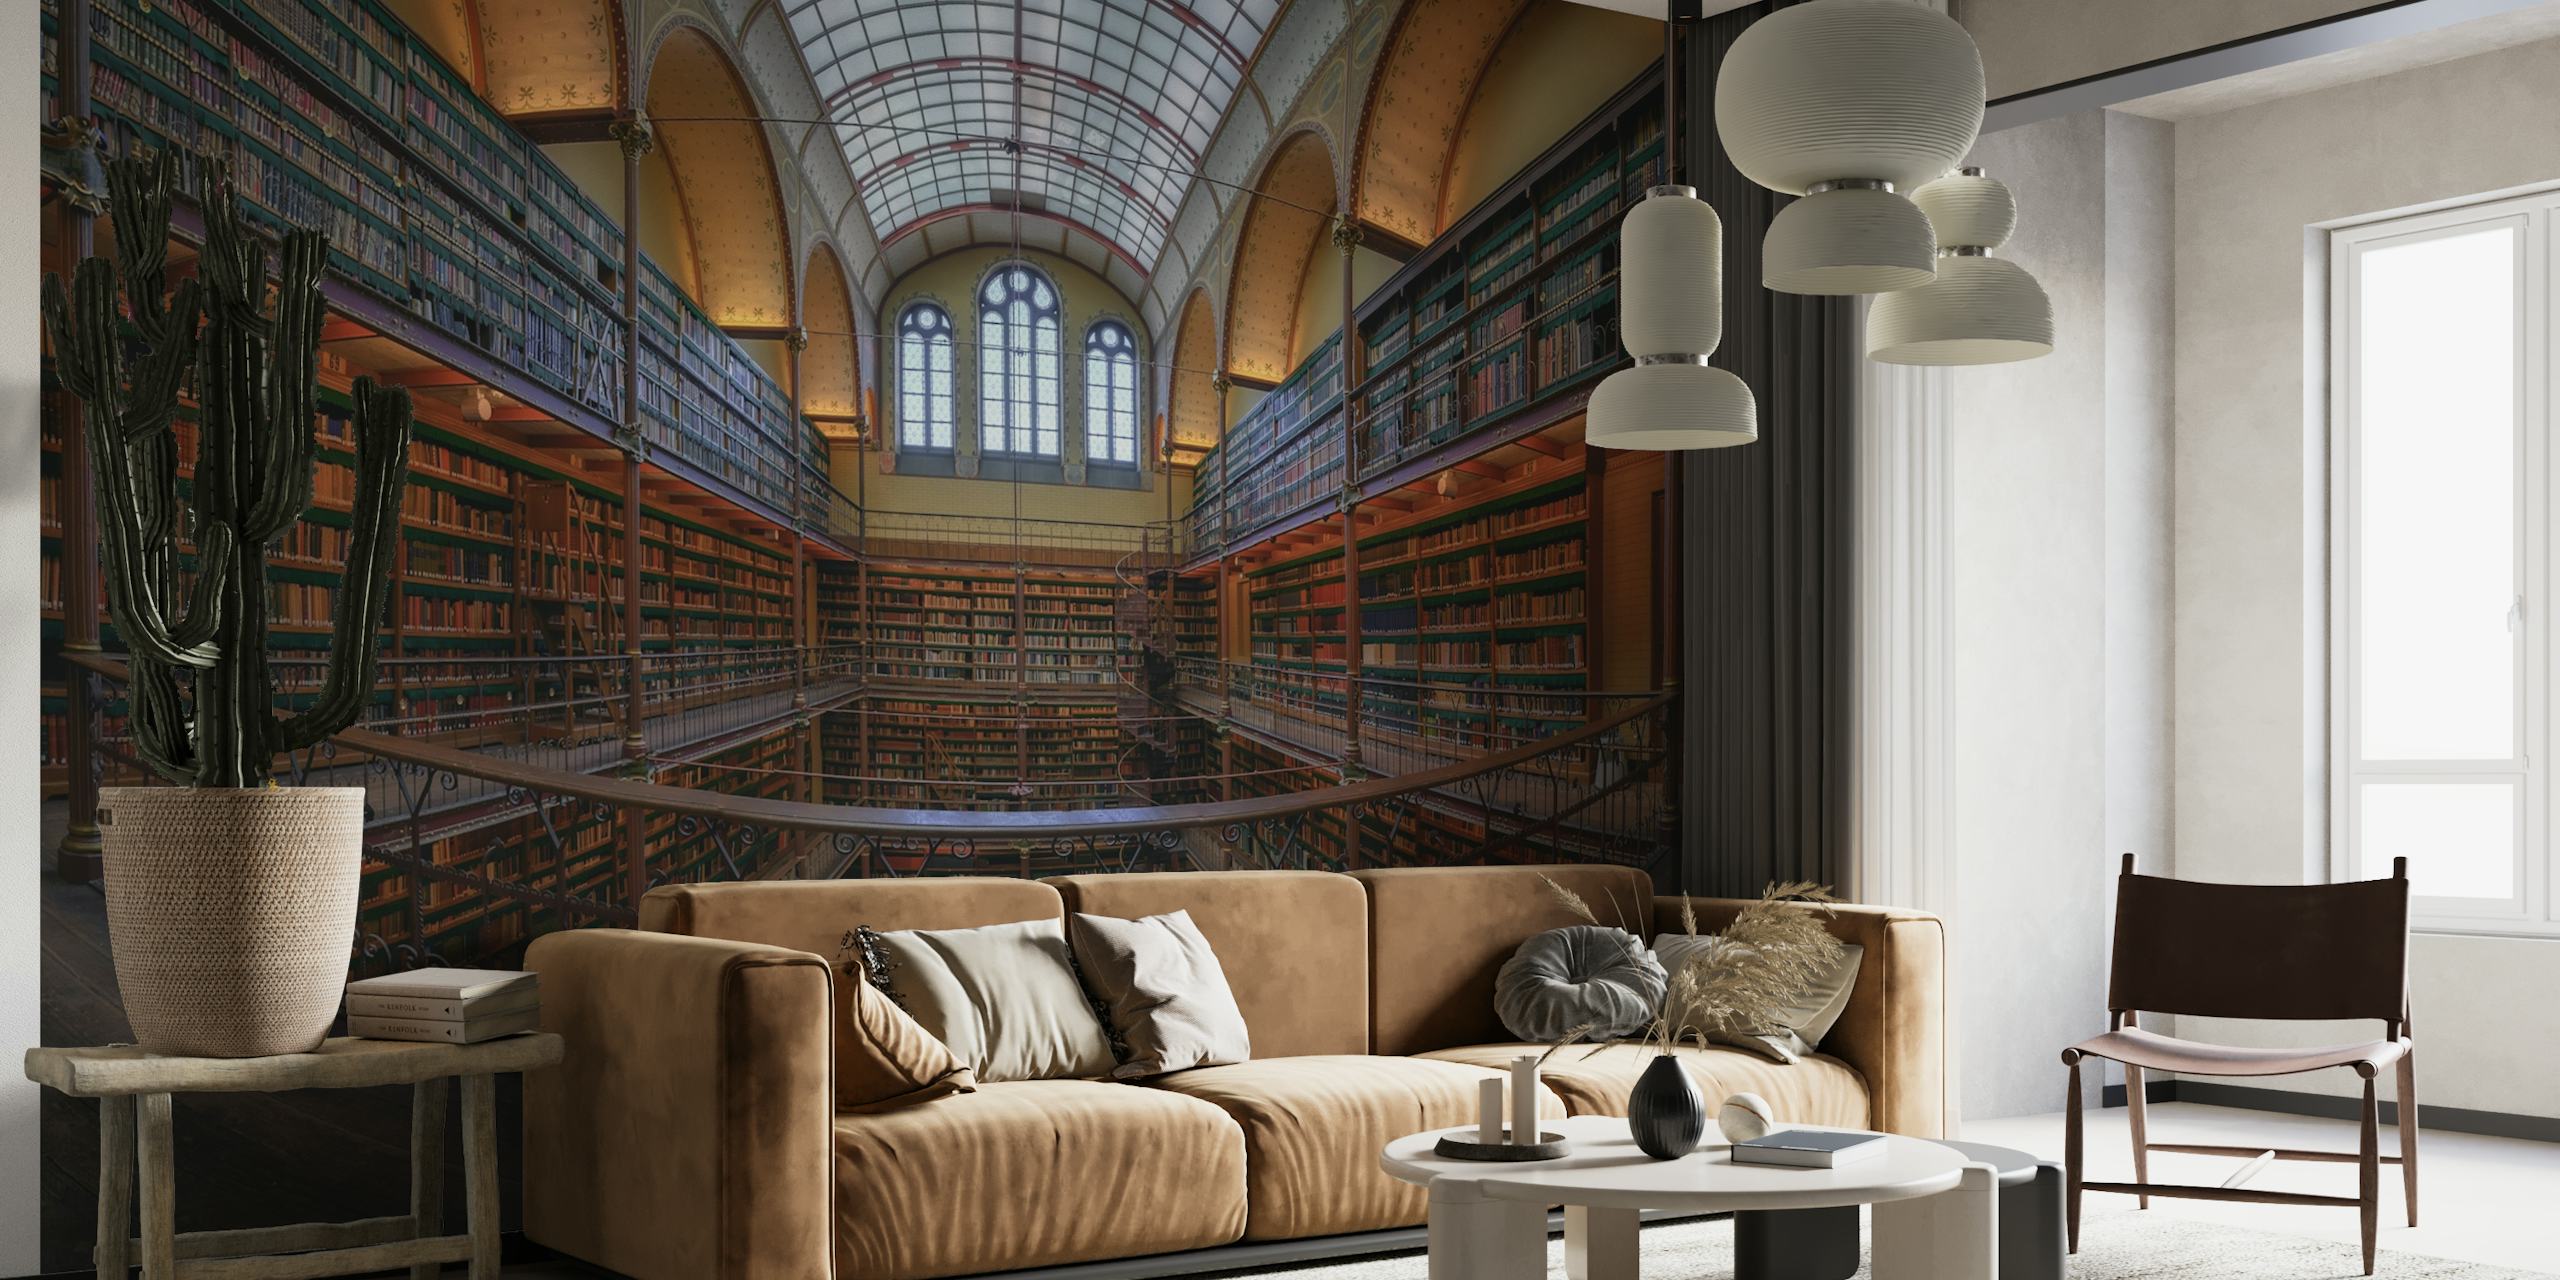 The Cuypers Library tapet